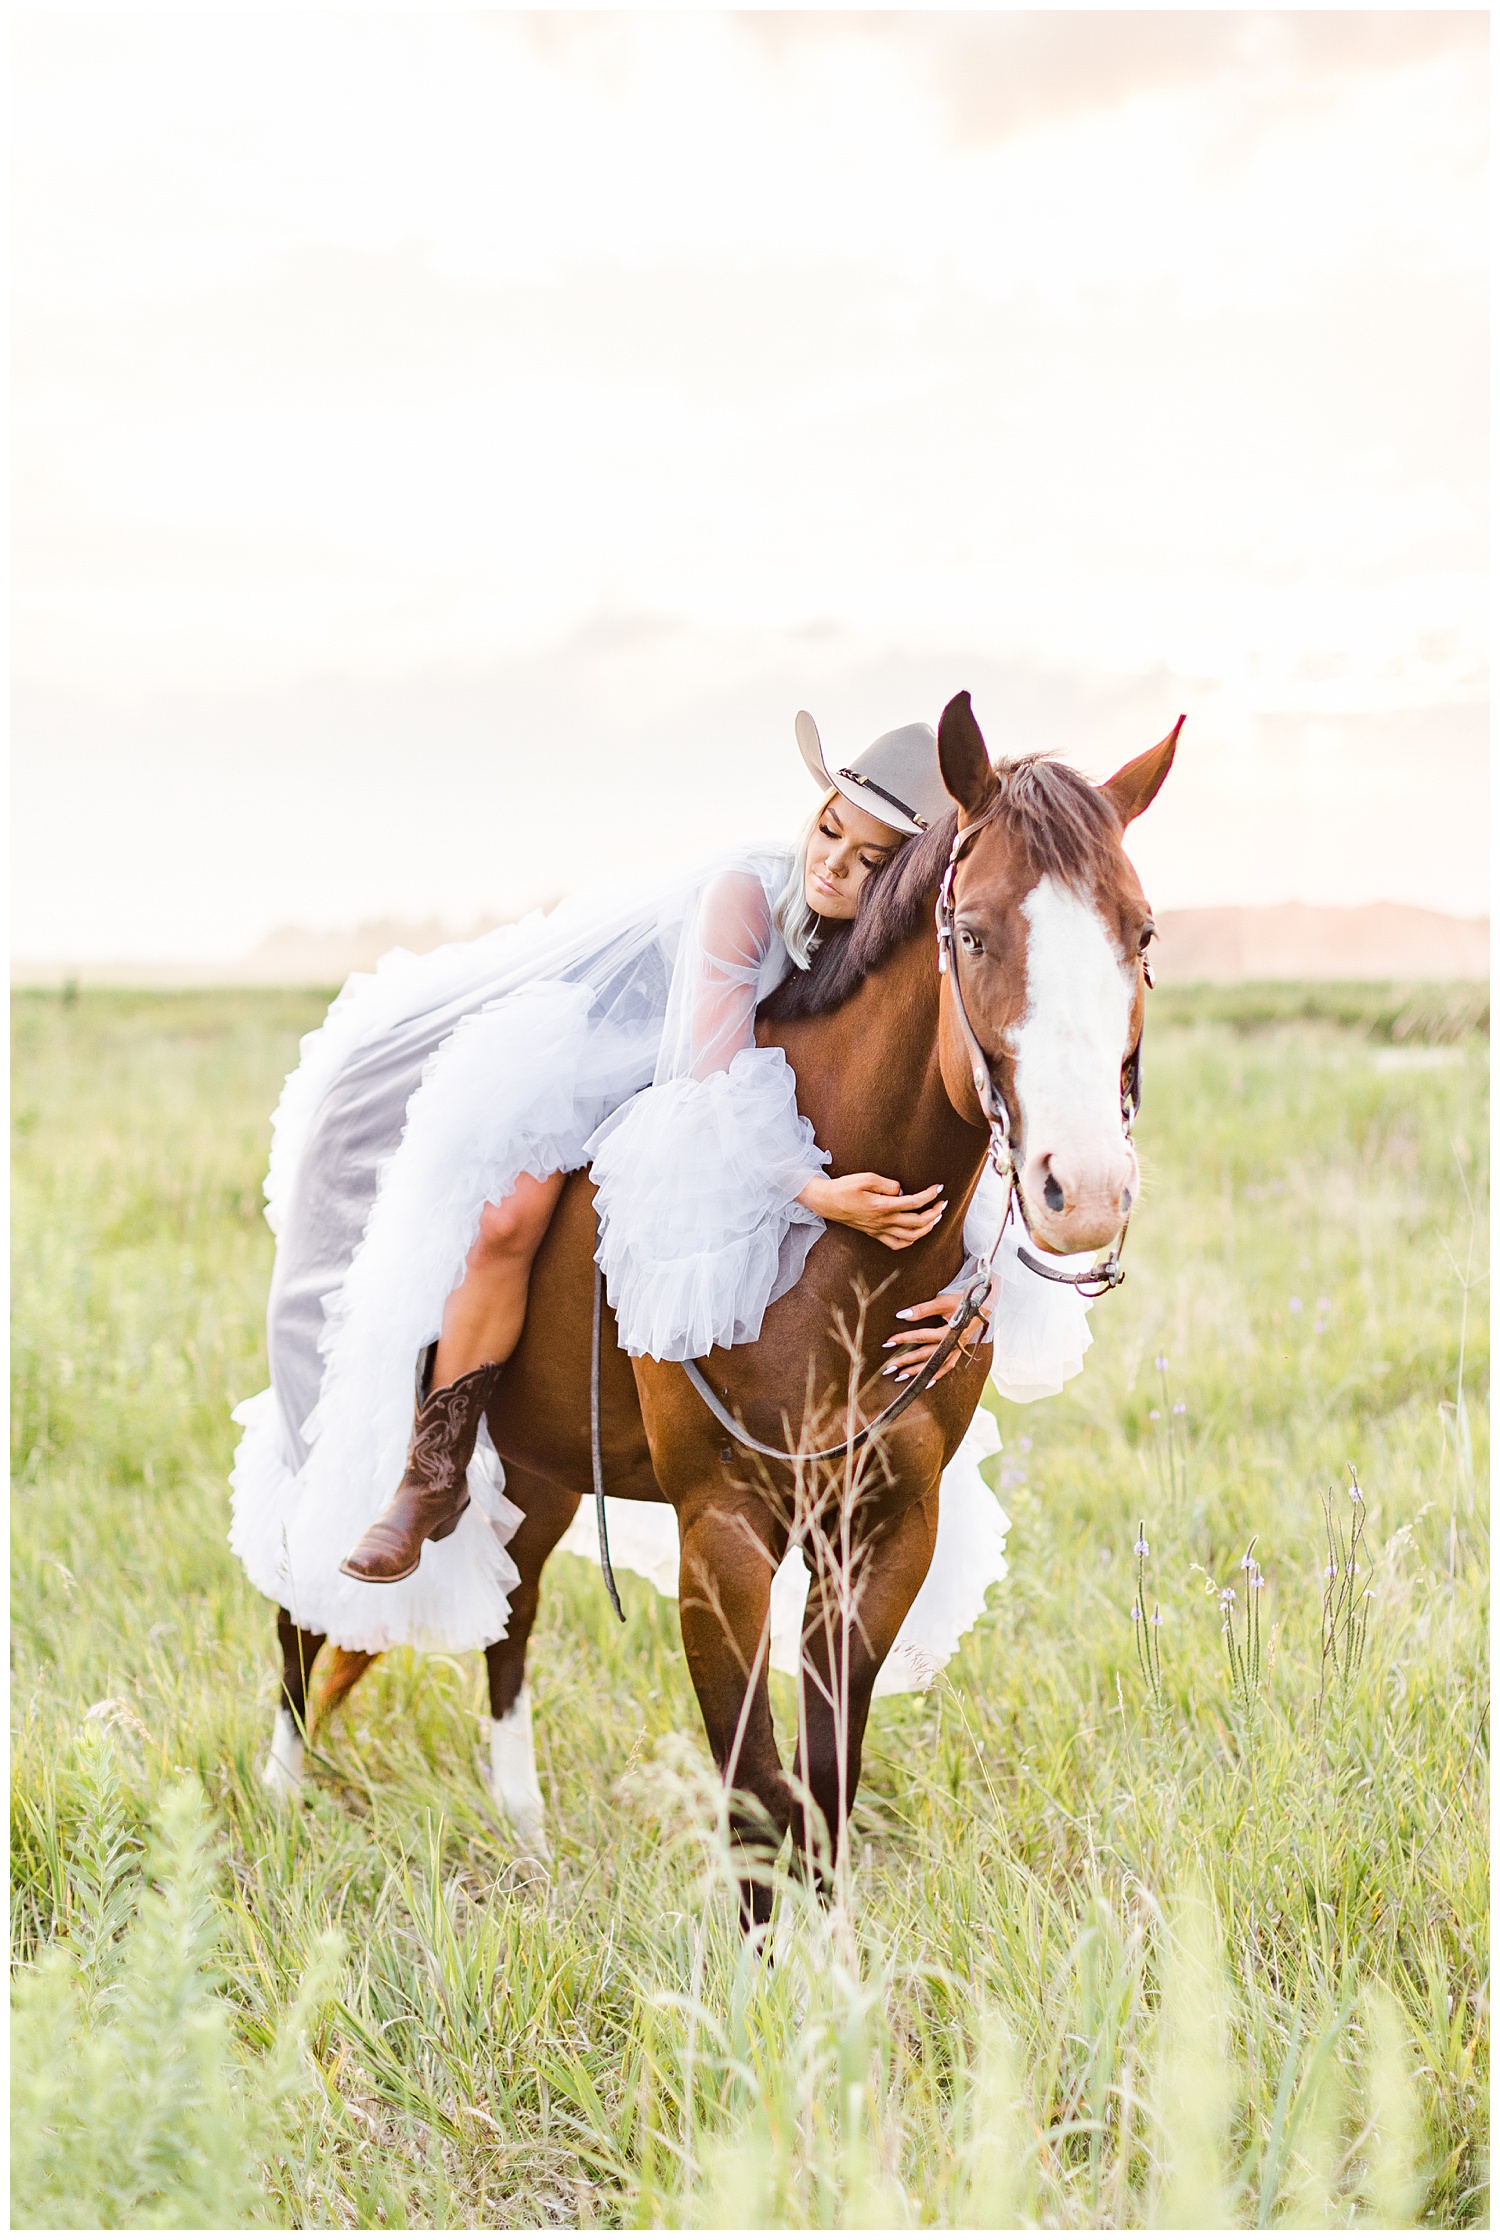 Addison wearing a puffy tulle dress snuggles Miss Flirty the horse in a grassy field | CB Studio